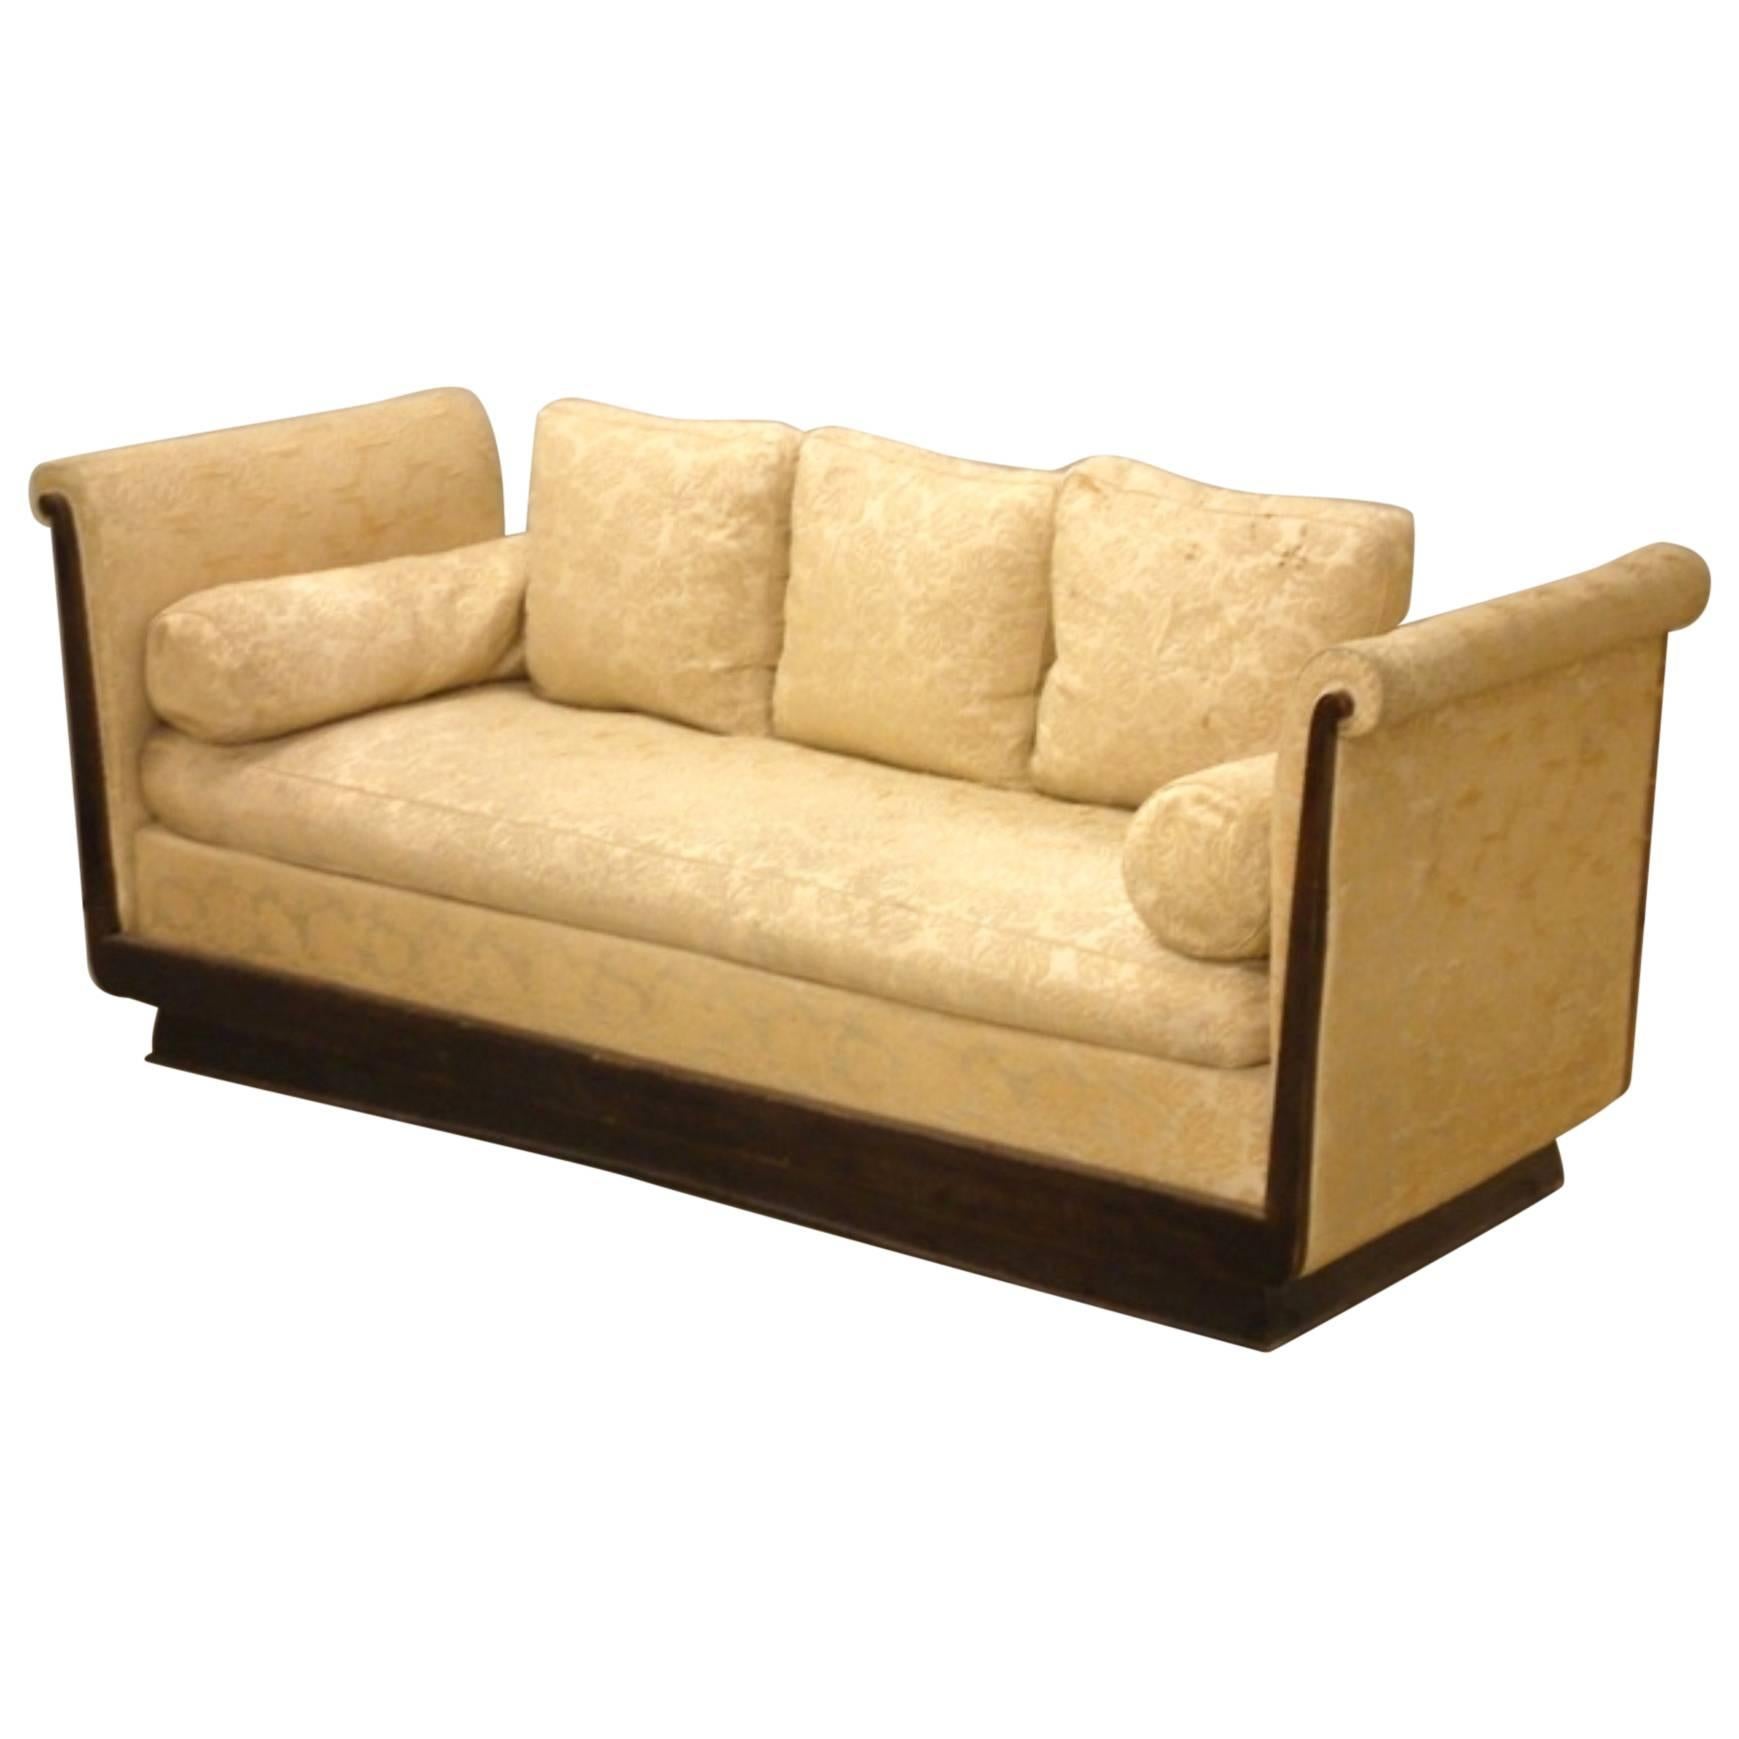 Dominique Meridian, Daybed or Sofa